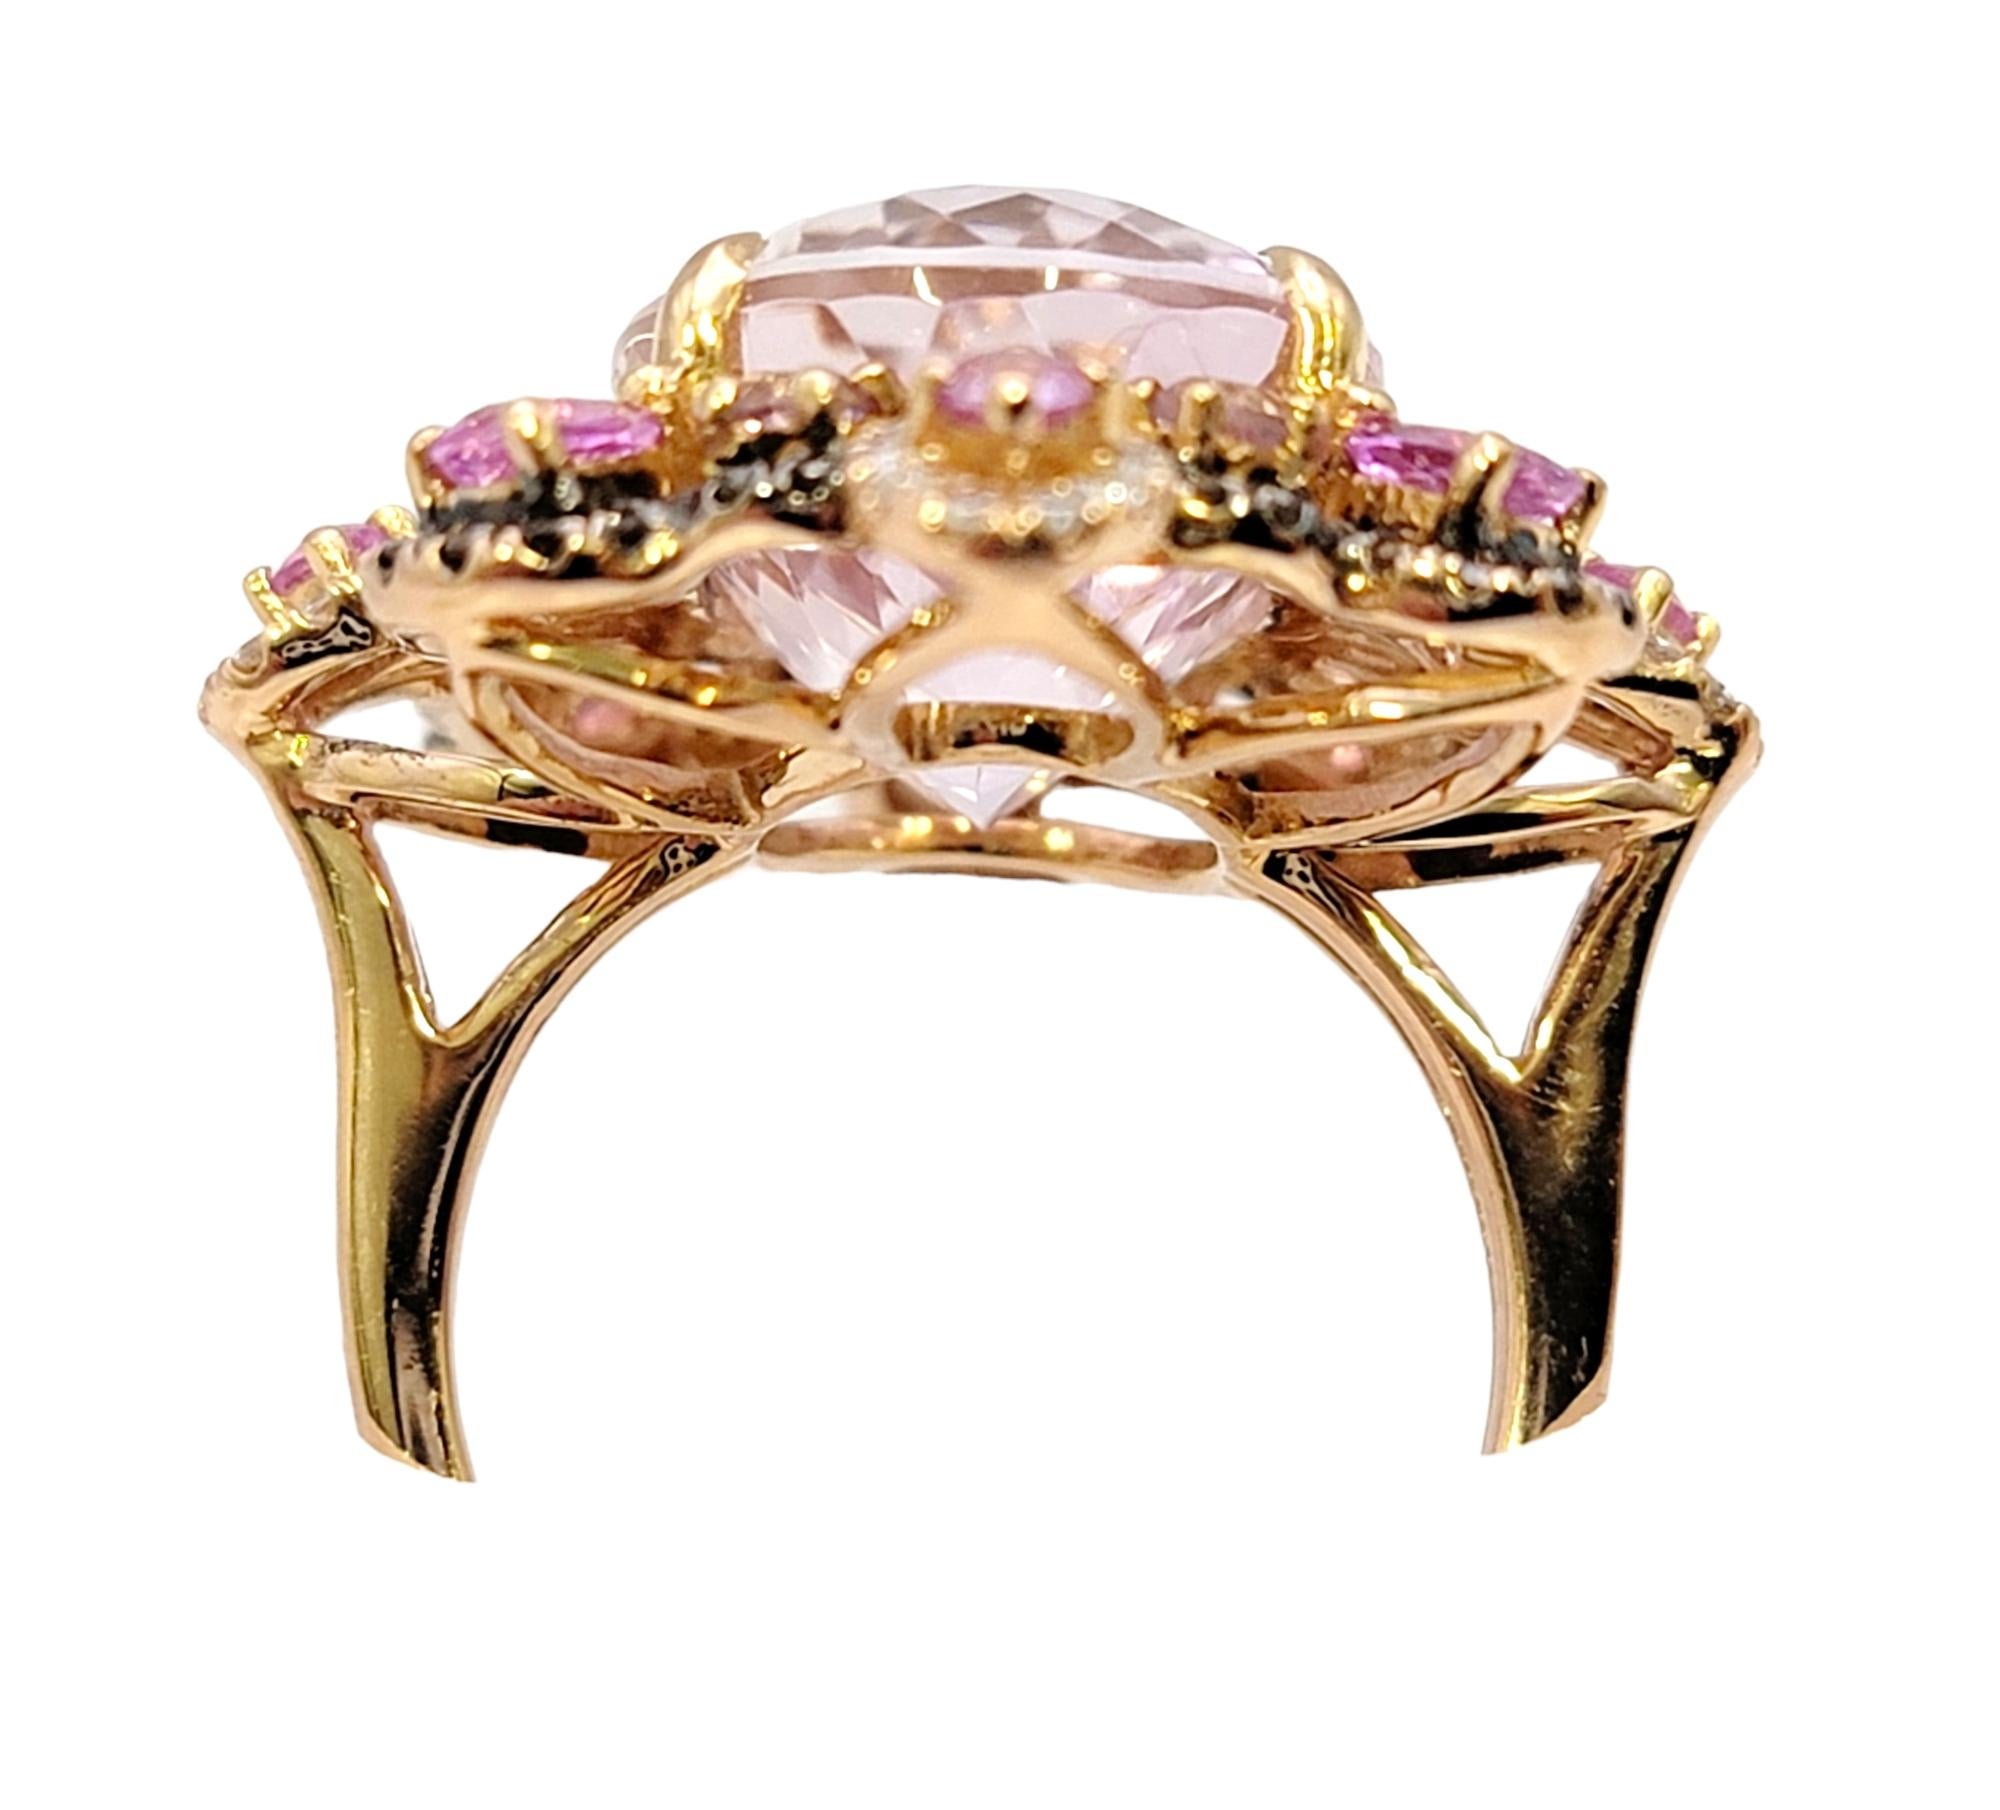 Contemporary Rare Pink Topaz Cocktail Ring with Diamonds and Sapphires 18 Karat Rose Gold For Sale